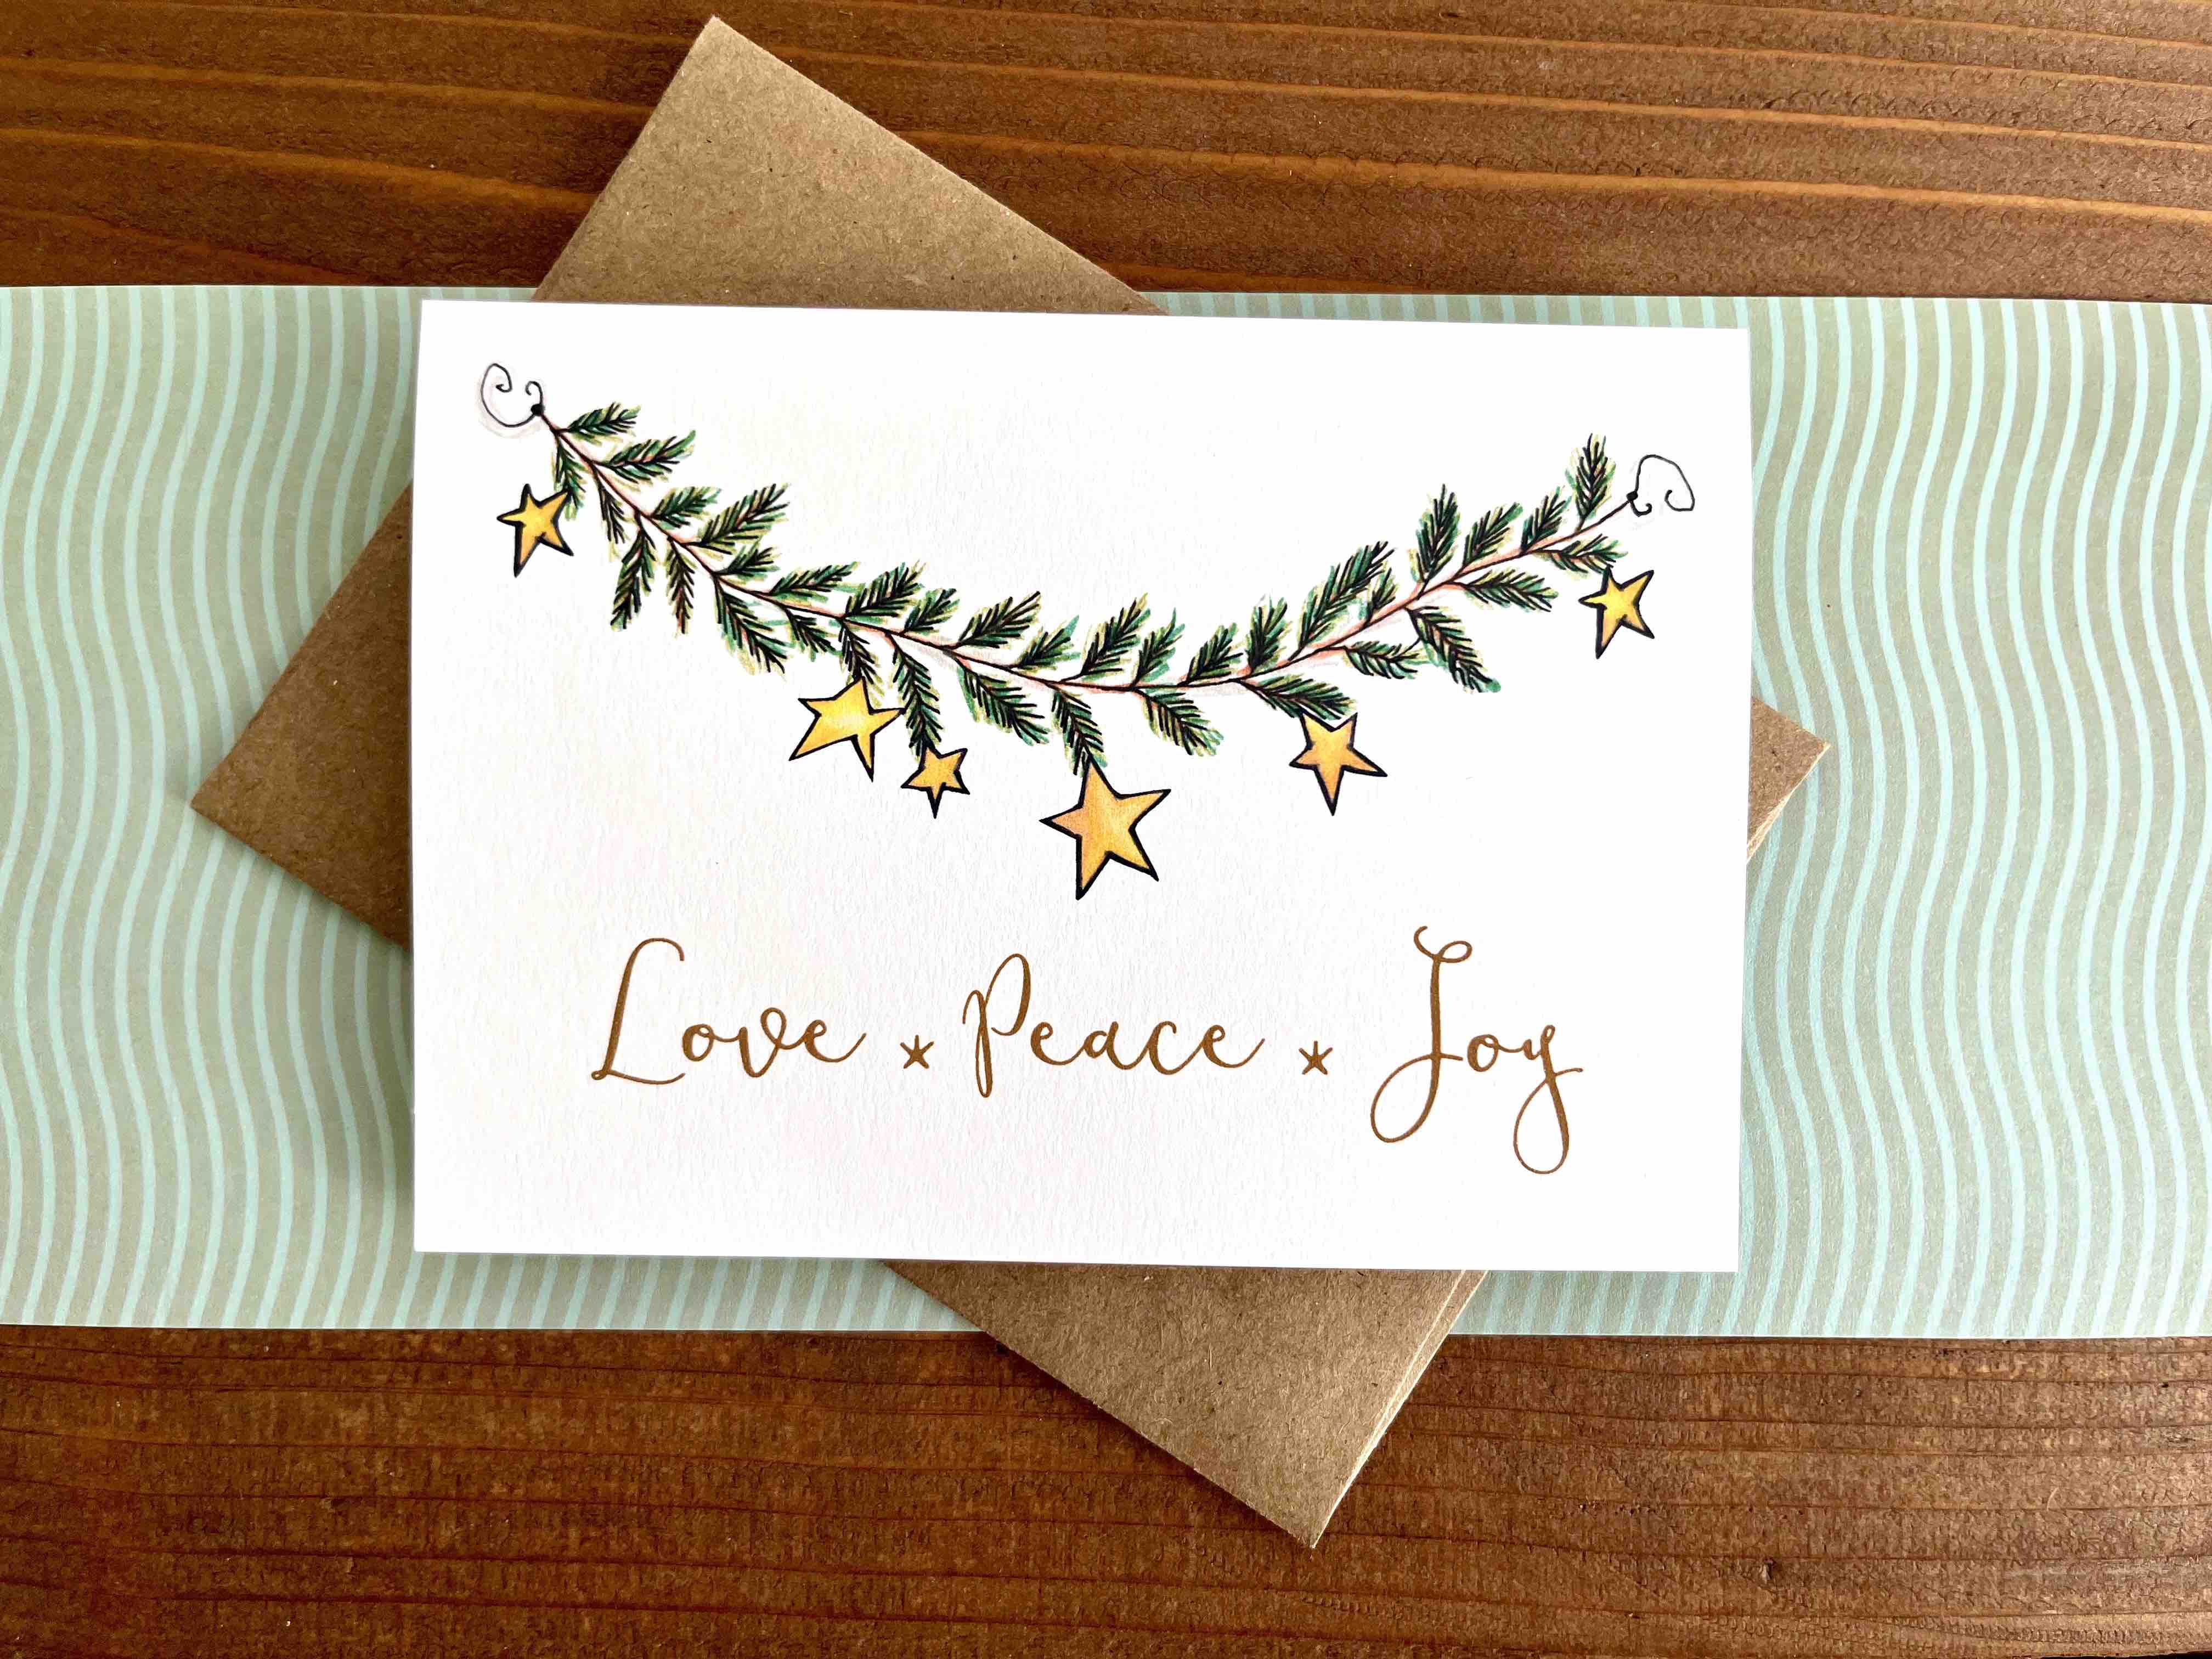 Garland Holiday Cards | Choose Your Message - Boxed Set of 8